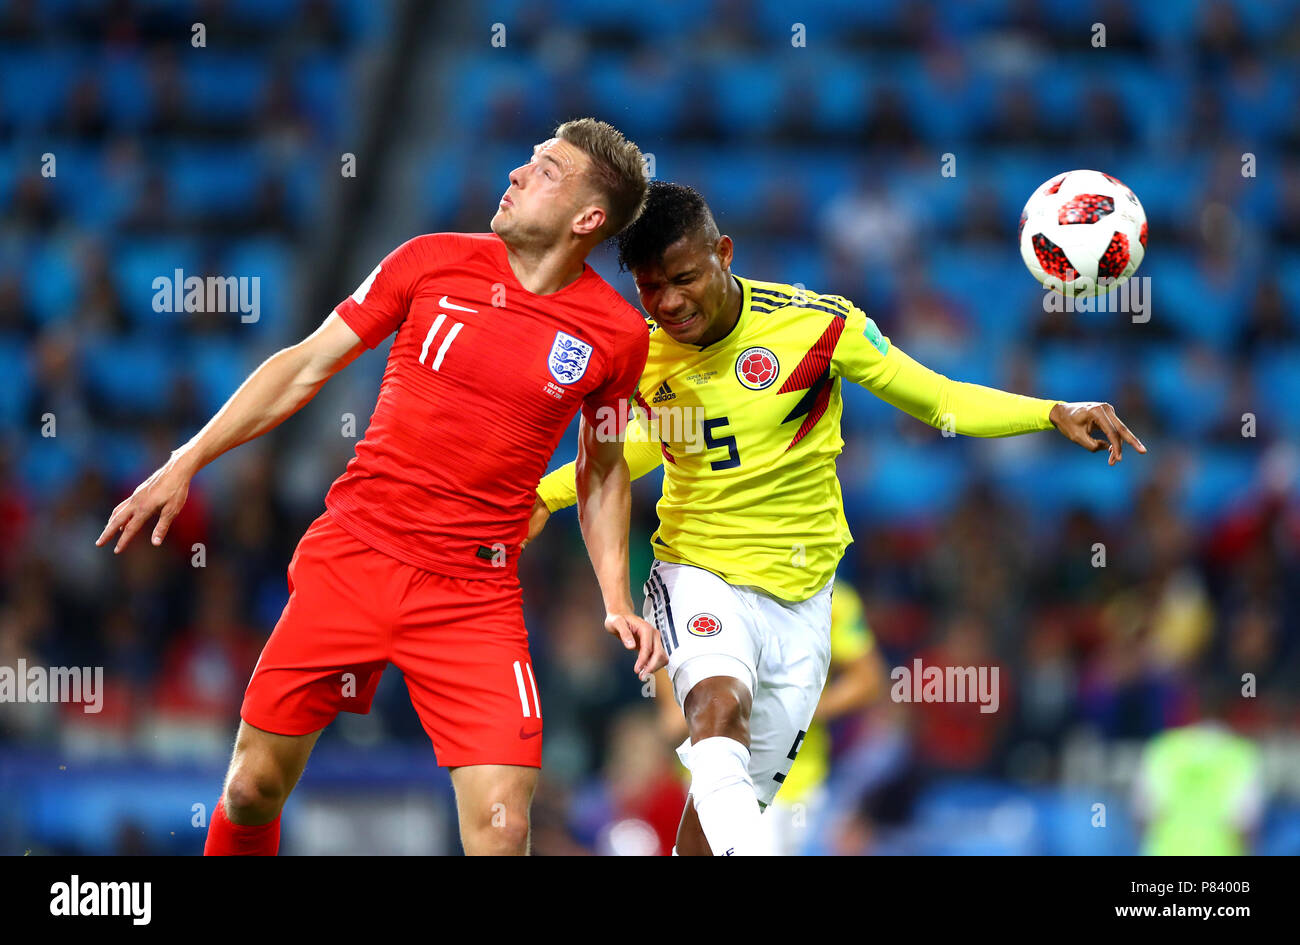 MOSCOW, RUSSIA - JULY 03:Jamie VARDY of England ,challenge with Wilmar BARRIOS of Colombia , during the 2018 FIFA World Cup Russia Round of 16 match between Colombia and England at Spartak Stadium  on July 3, 2018 in Moscow, Russia. (MB Media) Stock Photo